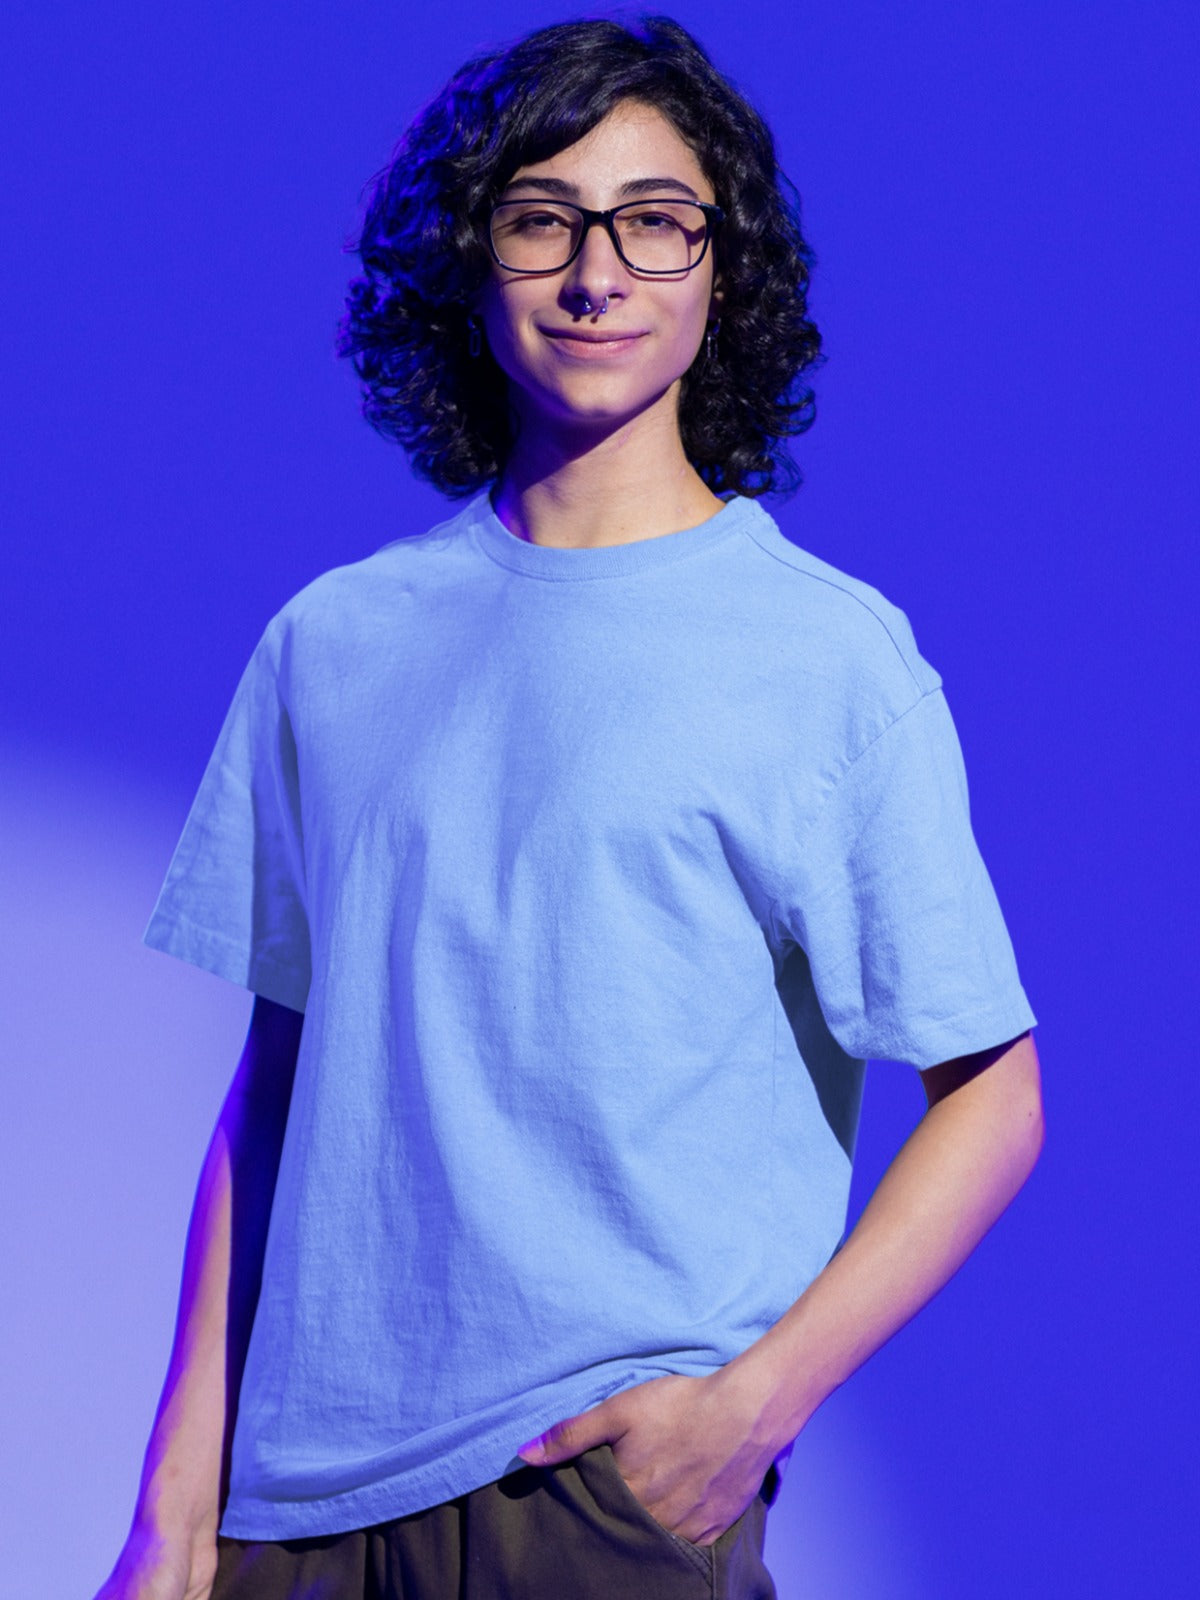 In this endearing image, a nerdy-looking boy sporting stylish glasses embodies a unique blend of comfort and fashion. He confidently rocks our Premium Heavyweight Baby Blue Oversized Tee, its relaxed fit exuding a cool, laid-back vibe. His choice of attire complements his smart and unassuming style, making a subtle yet distinctive fashion statement. The baby blue tee reflects his penchant for comfort without compromising on a touch of personal flair.